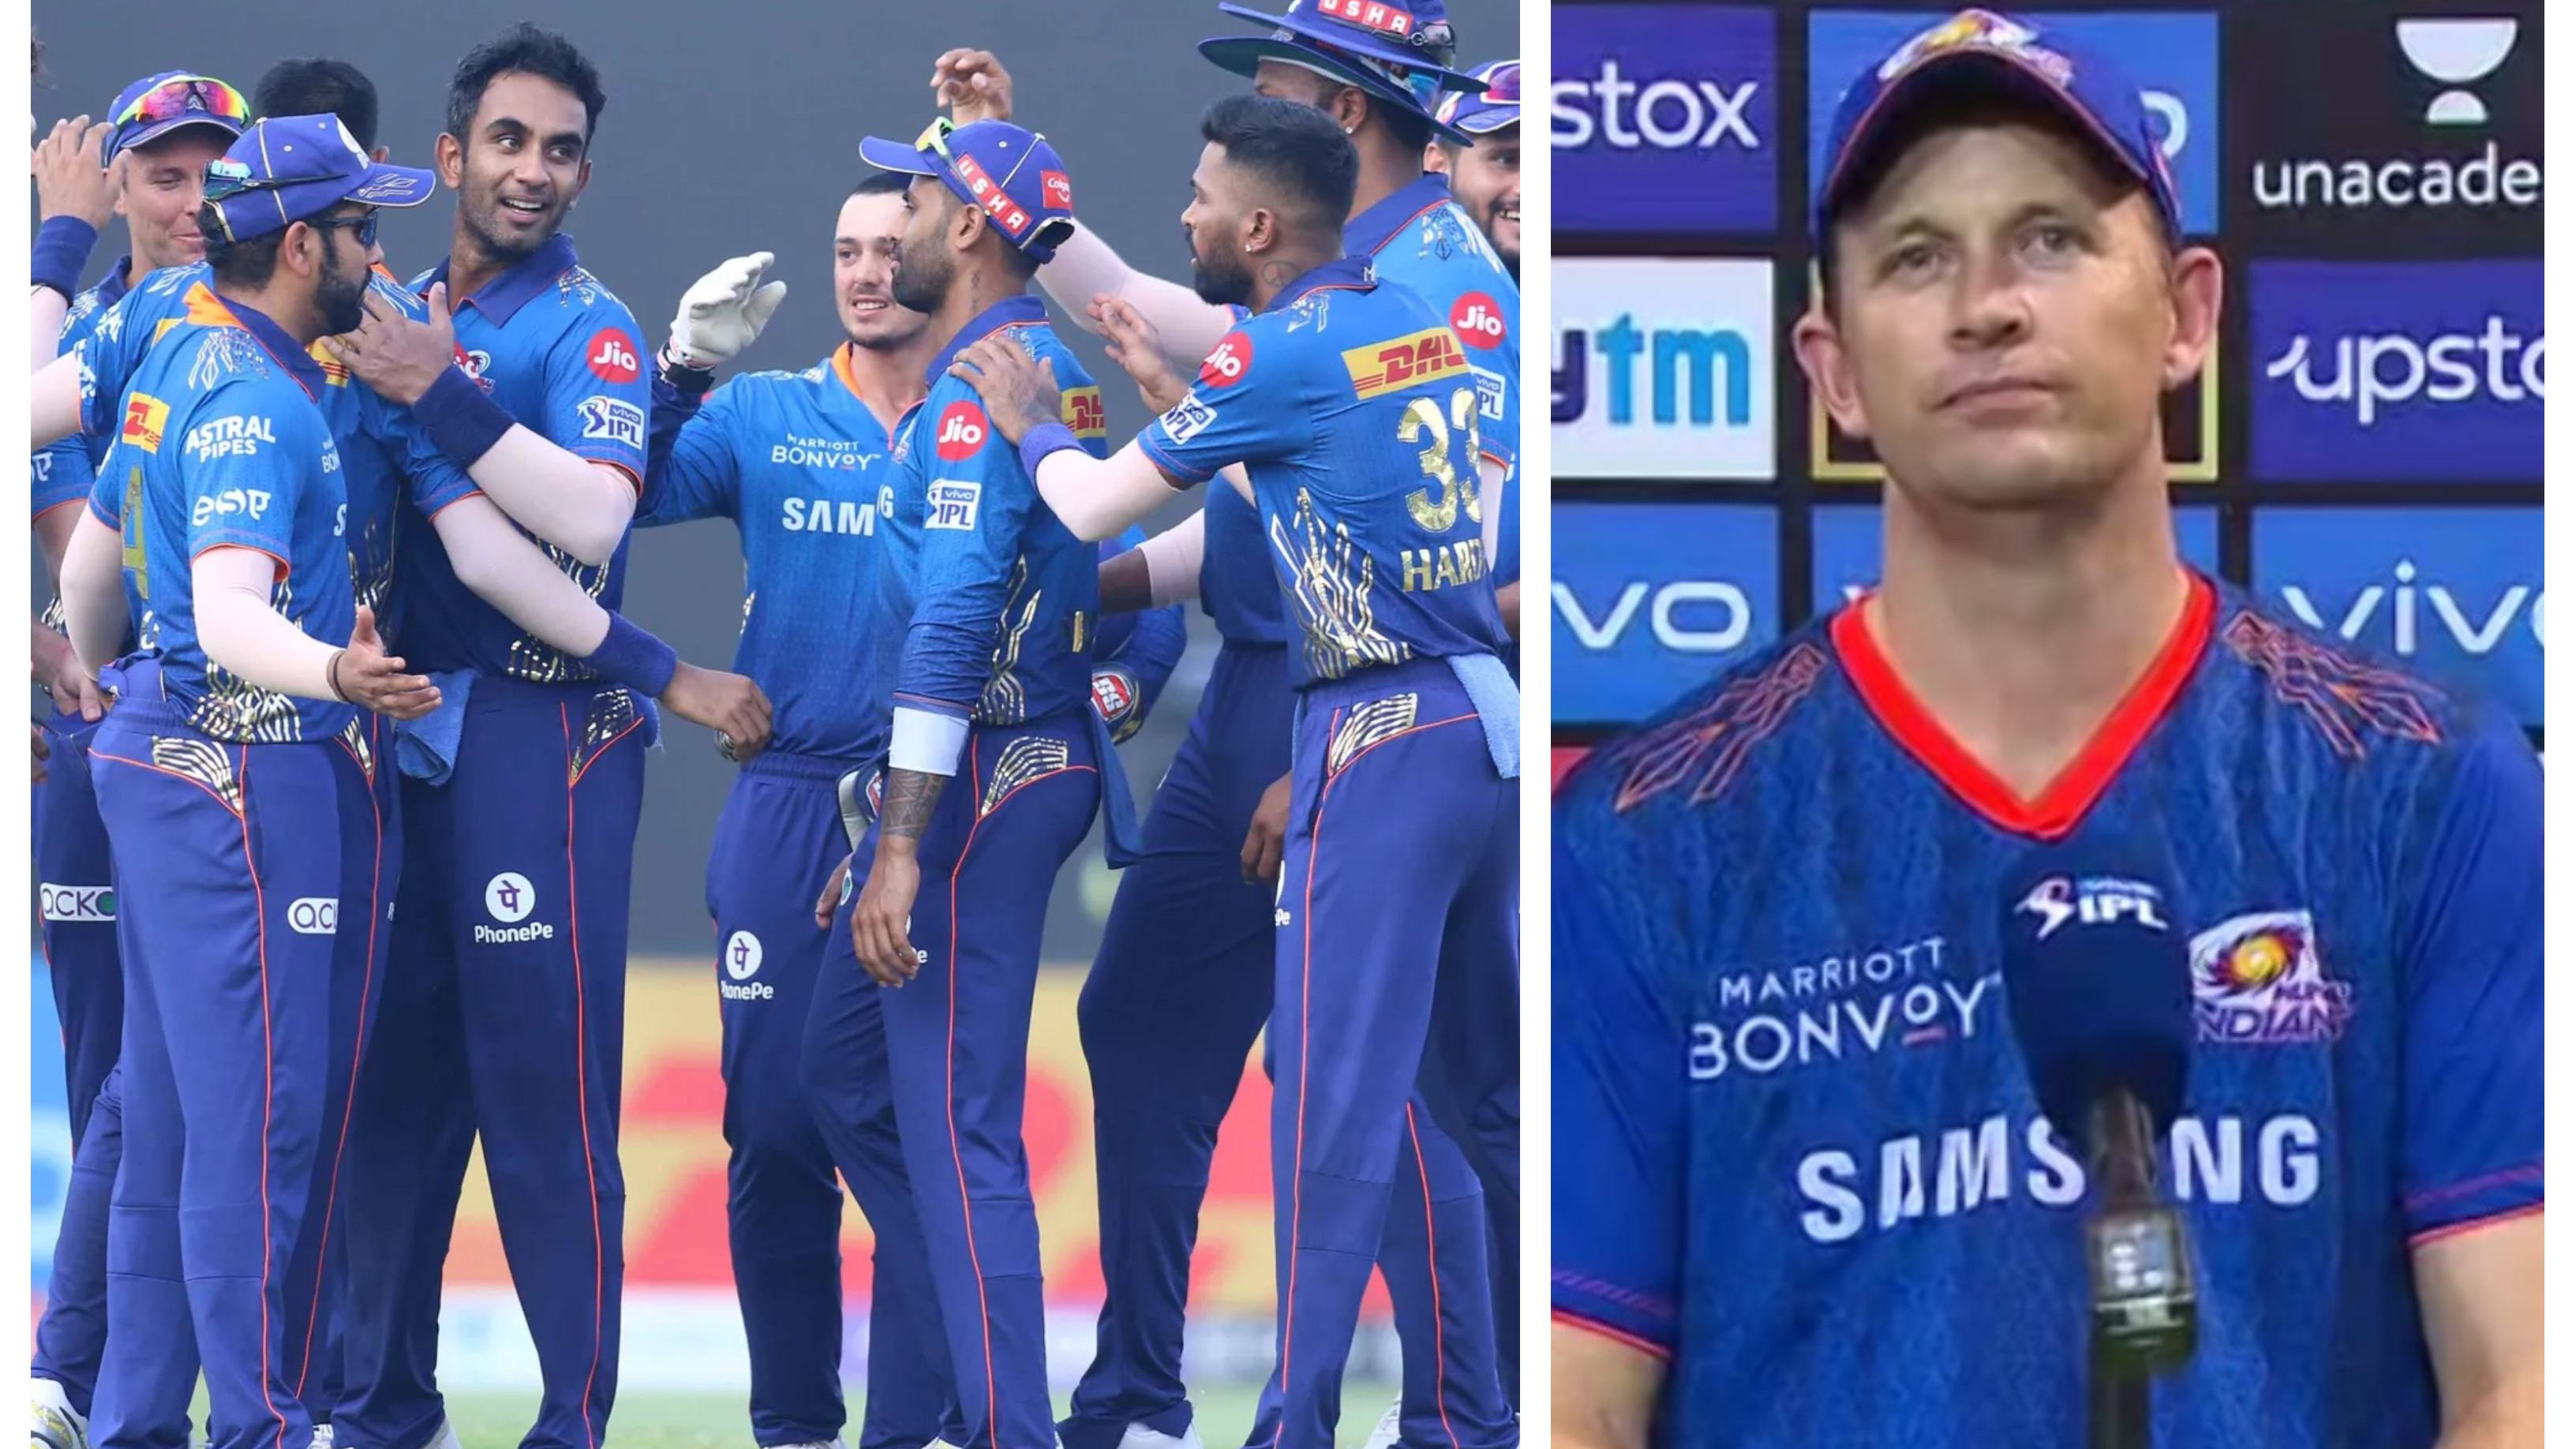 IPL 2021: “We are still in the competition”, says Mumbai Indians bowling coach Shane Bond